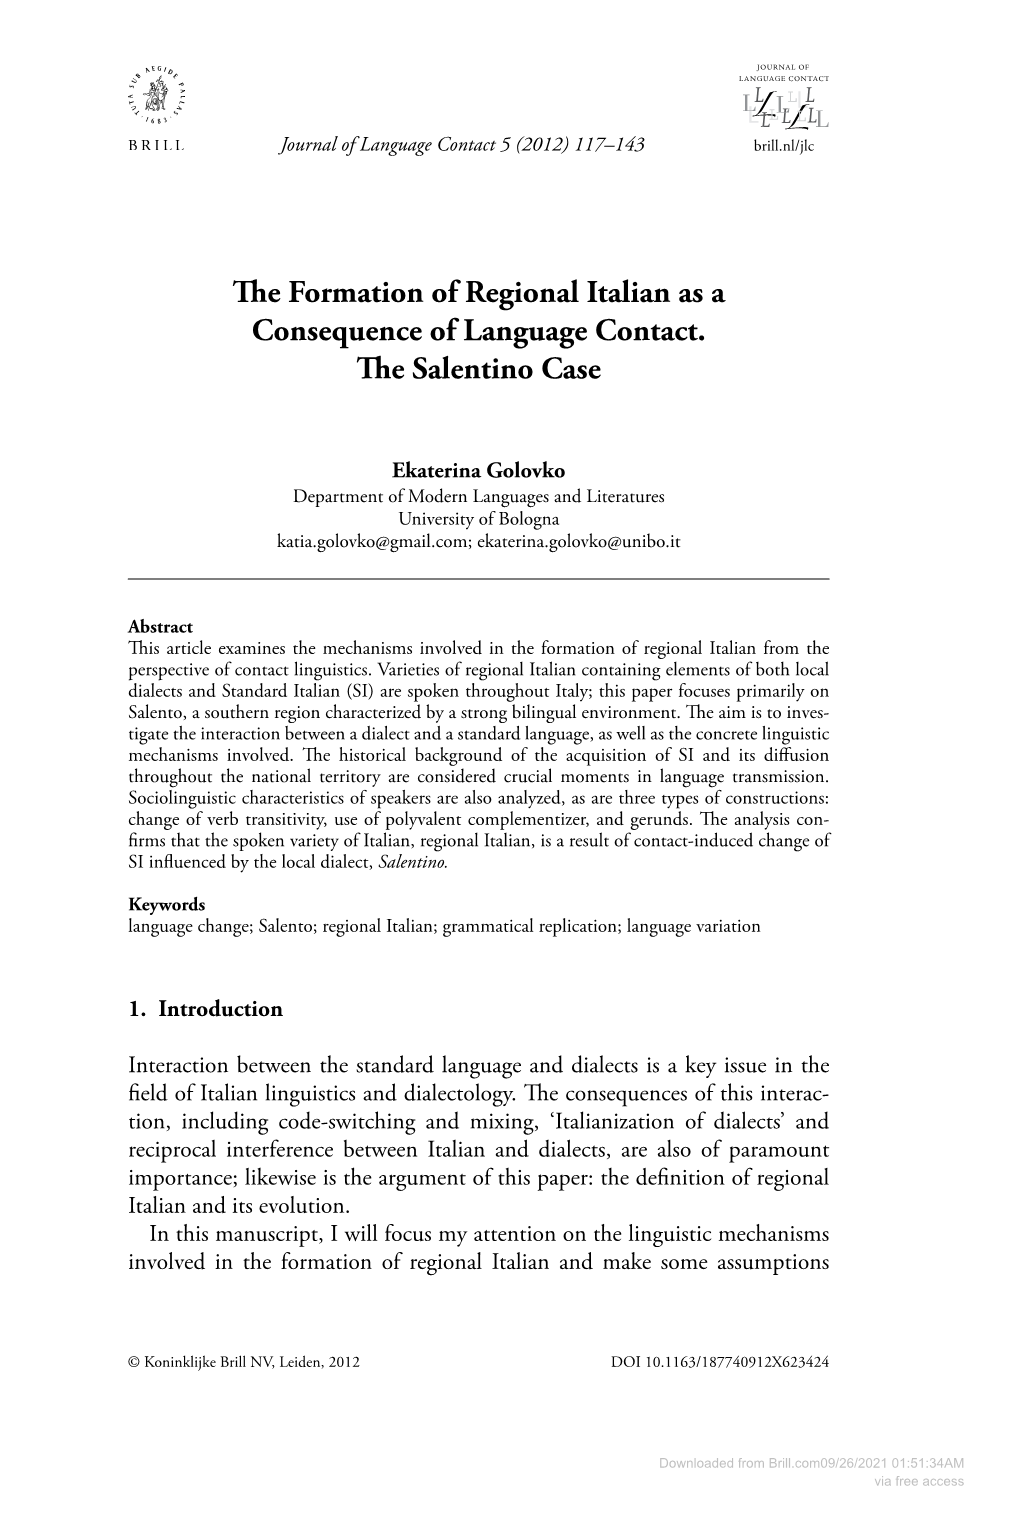 The Formation of Regional Italian As a Consequence of Language Contact